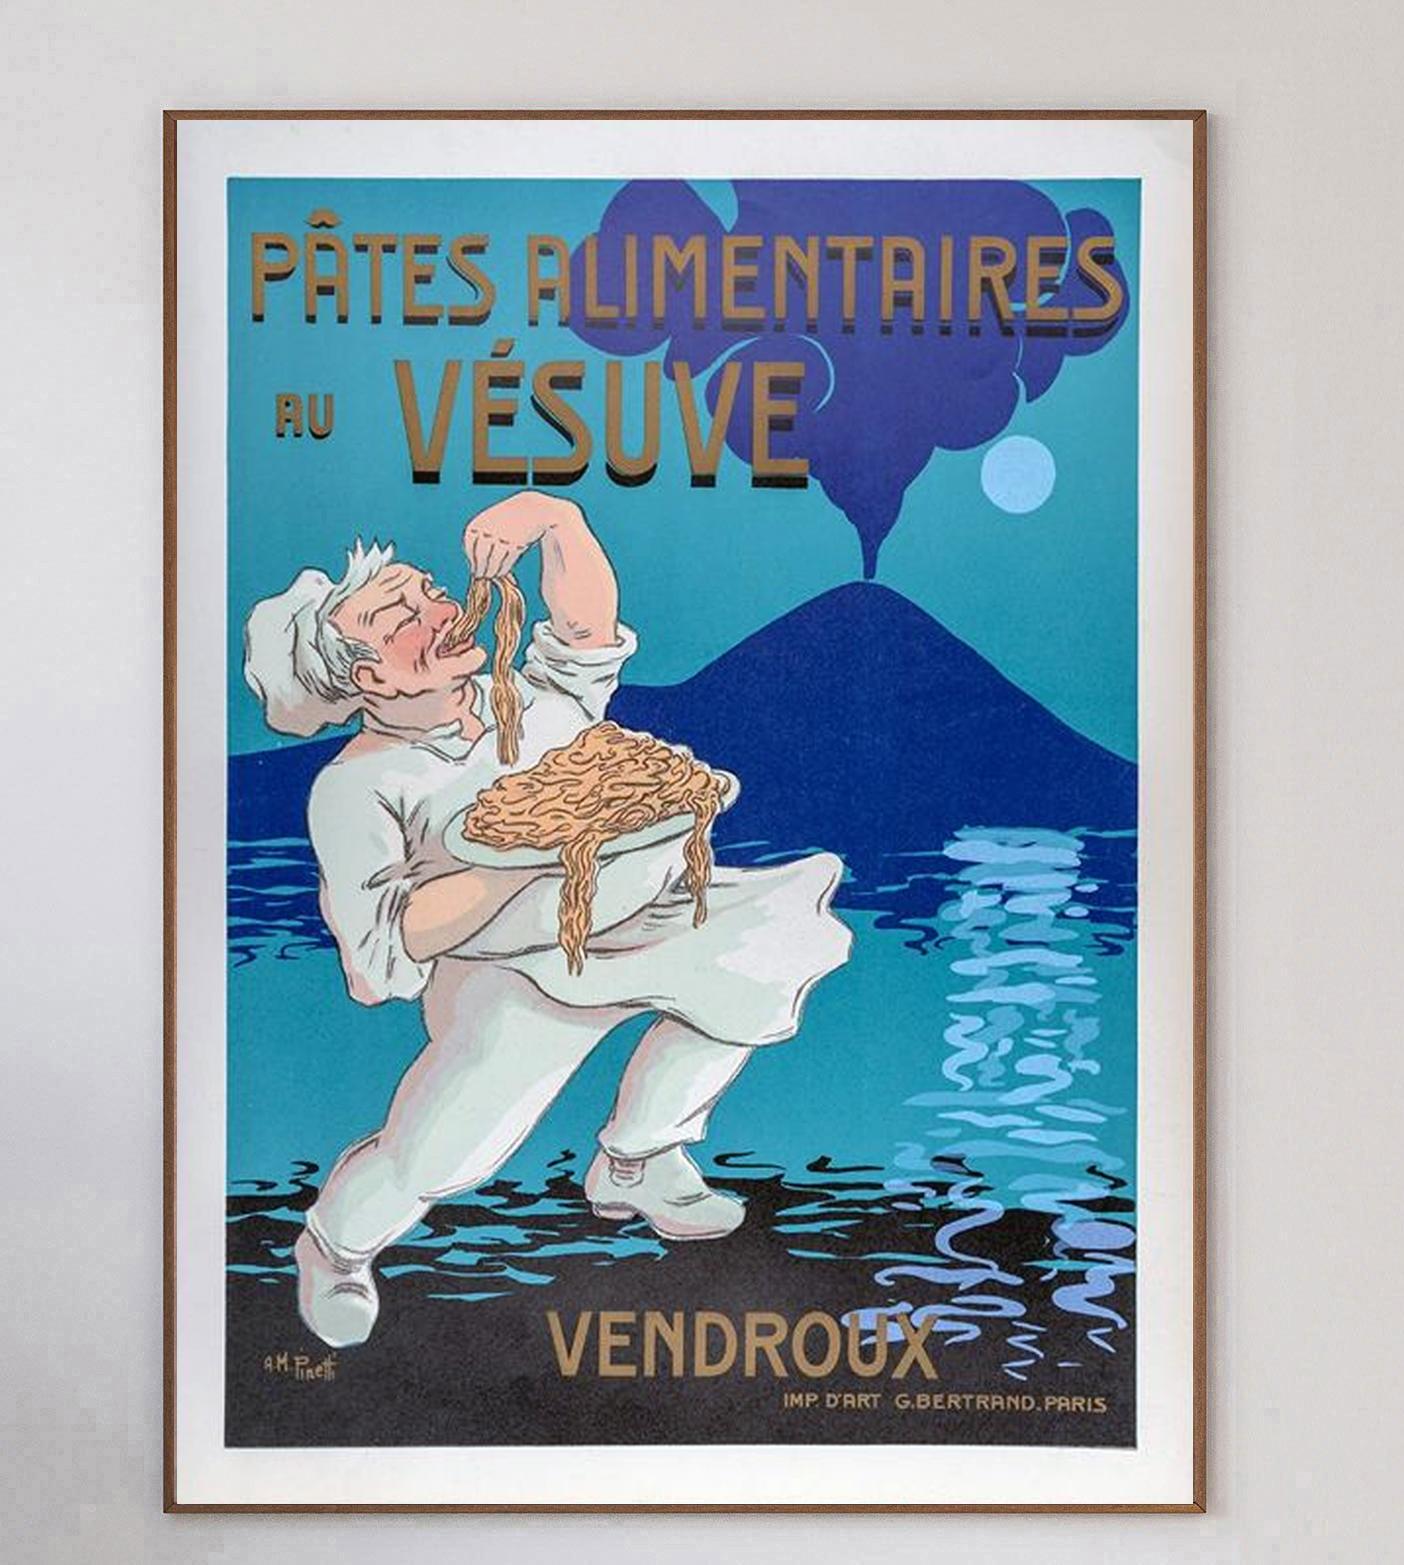 With gorgeous artwork from Italian artist A.M Pinetti, this stunning and rare piece was created in 1930 to promote Vendroux 